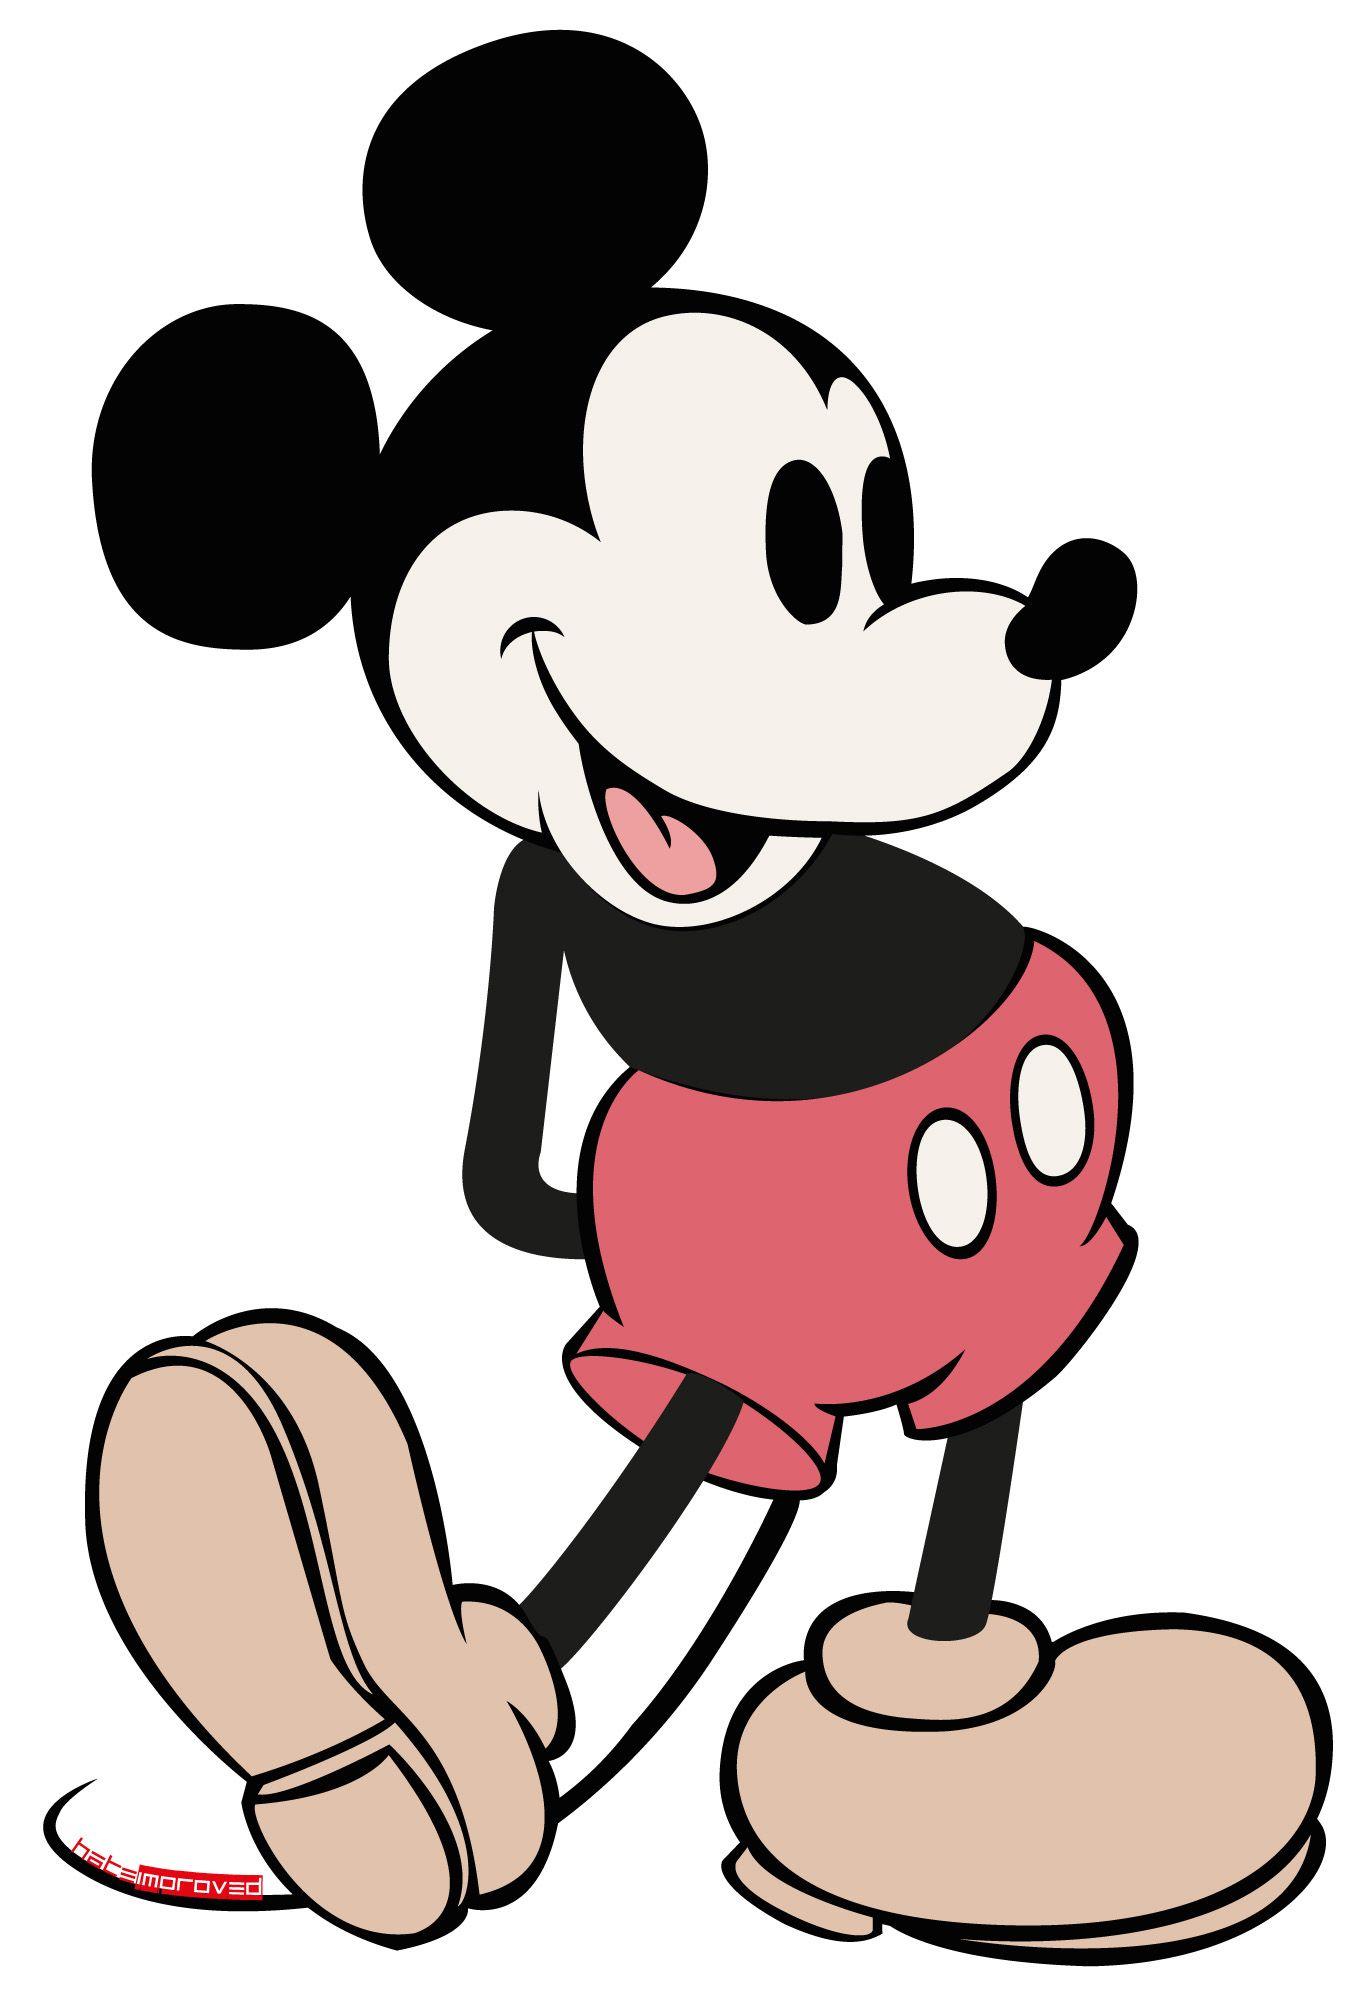 Old Mickey Mouse Logo - Free Mickey Mouse Vector, Download Free Clip Art, Free Clip Art